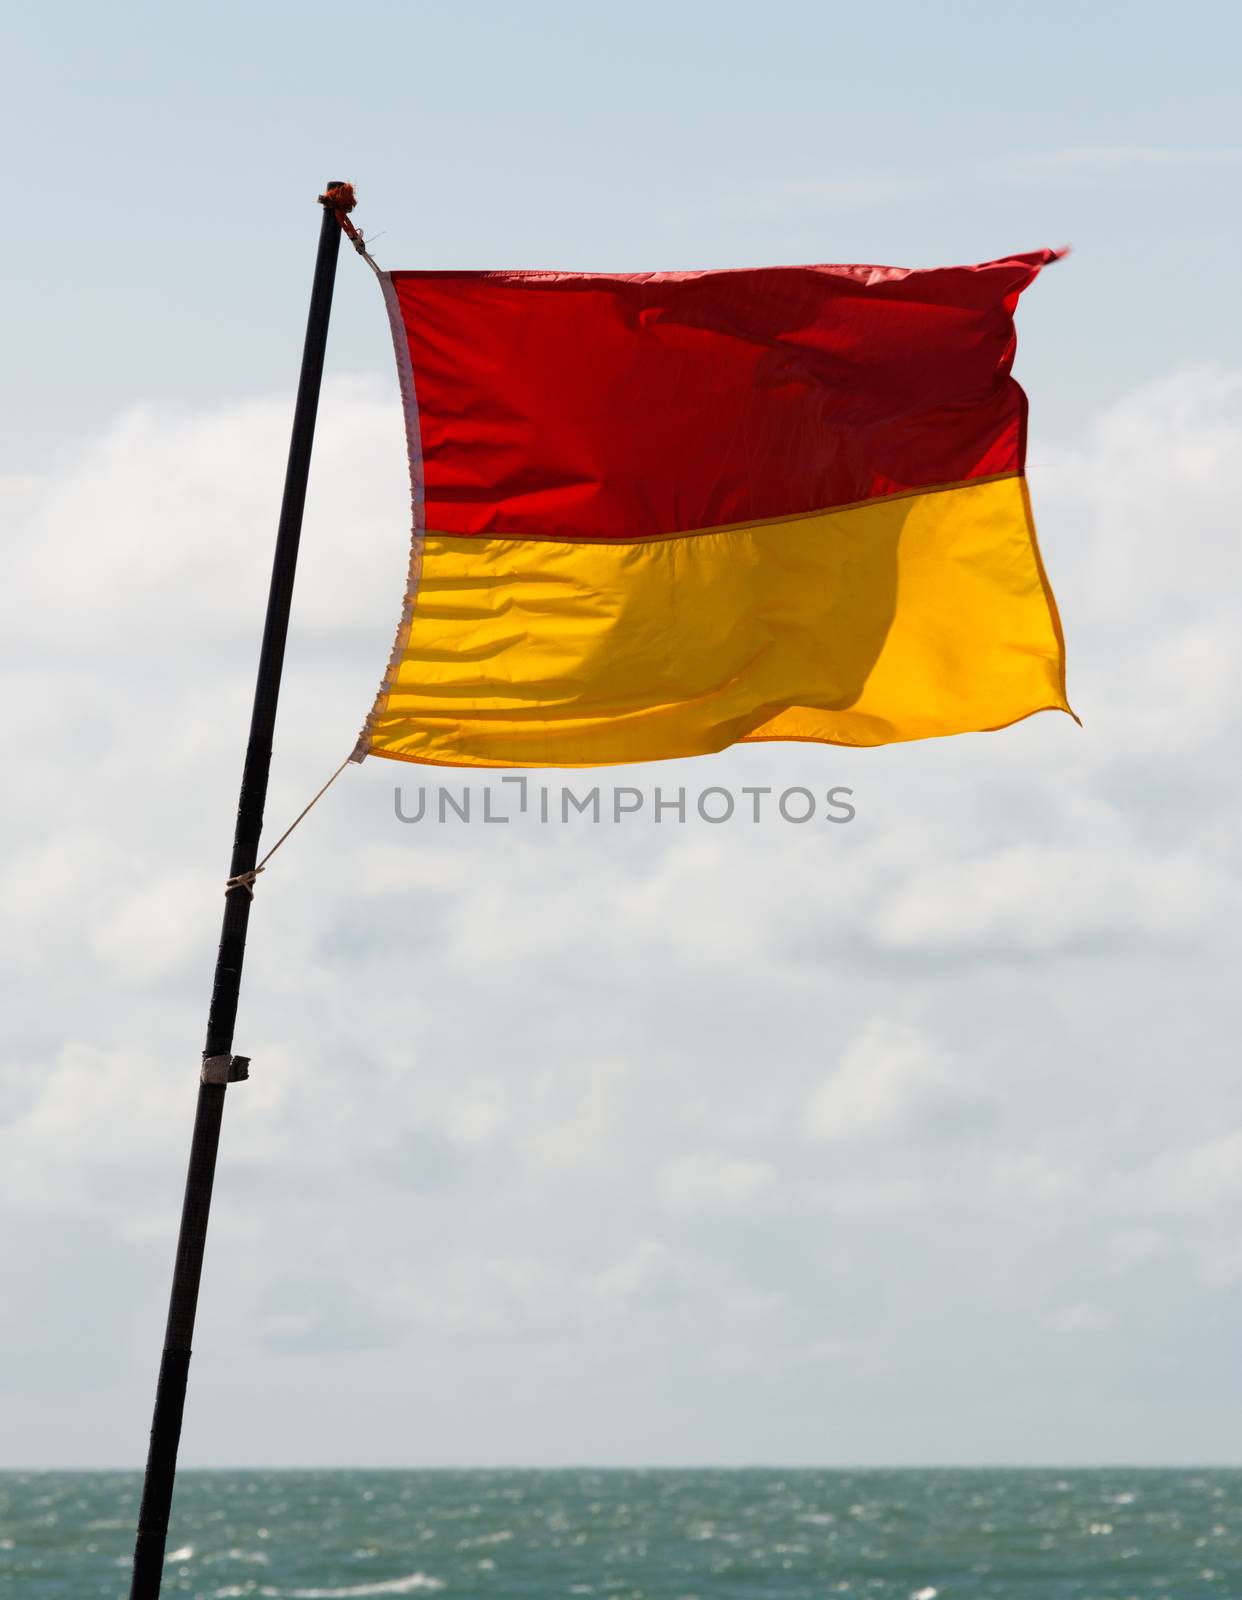 Lifeguard patrolled area flag by TimAwe